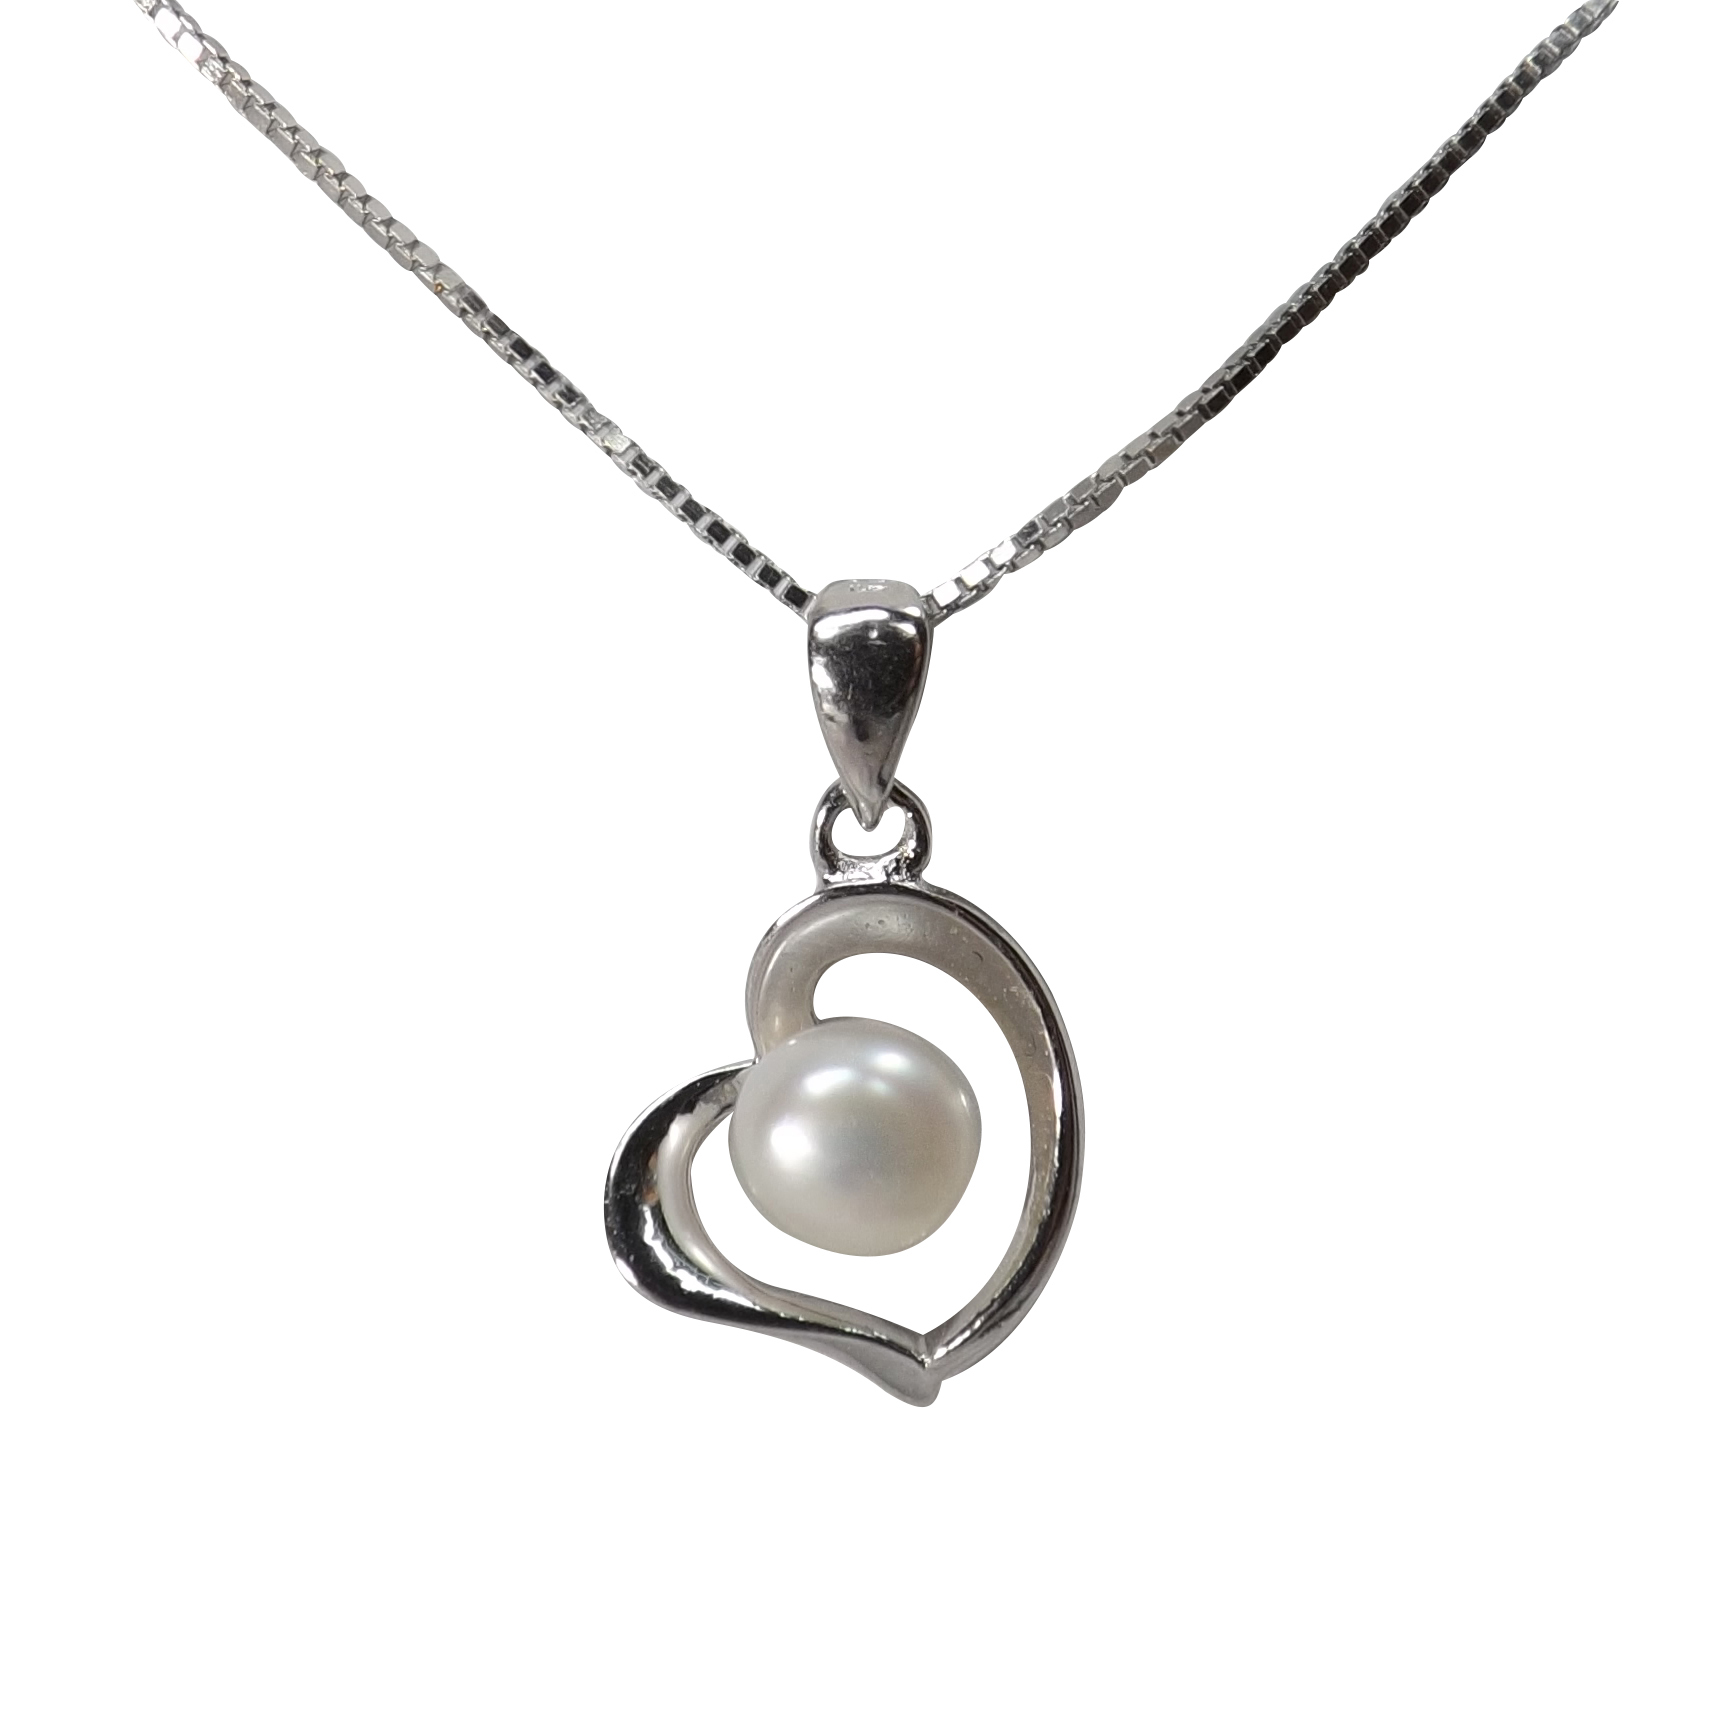 Modern 925 Sterling Silver Heart and Pearl Pendant Necklace with Adjustable  Length